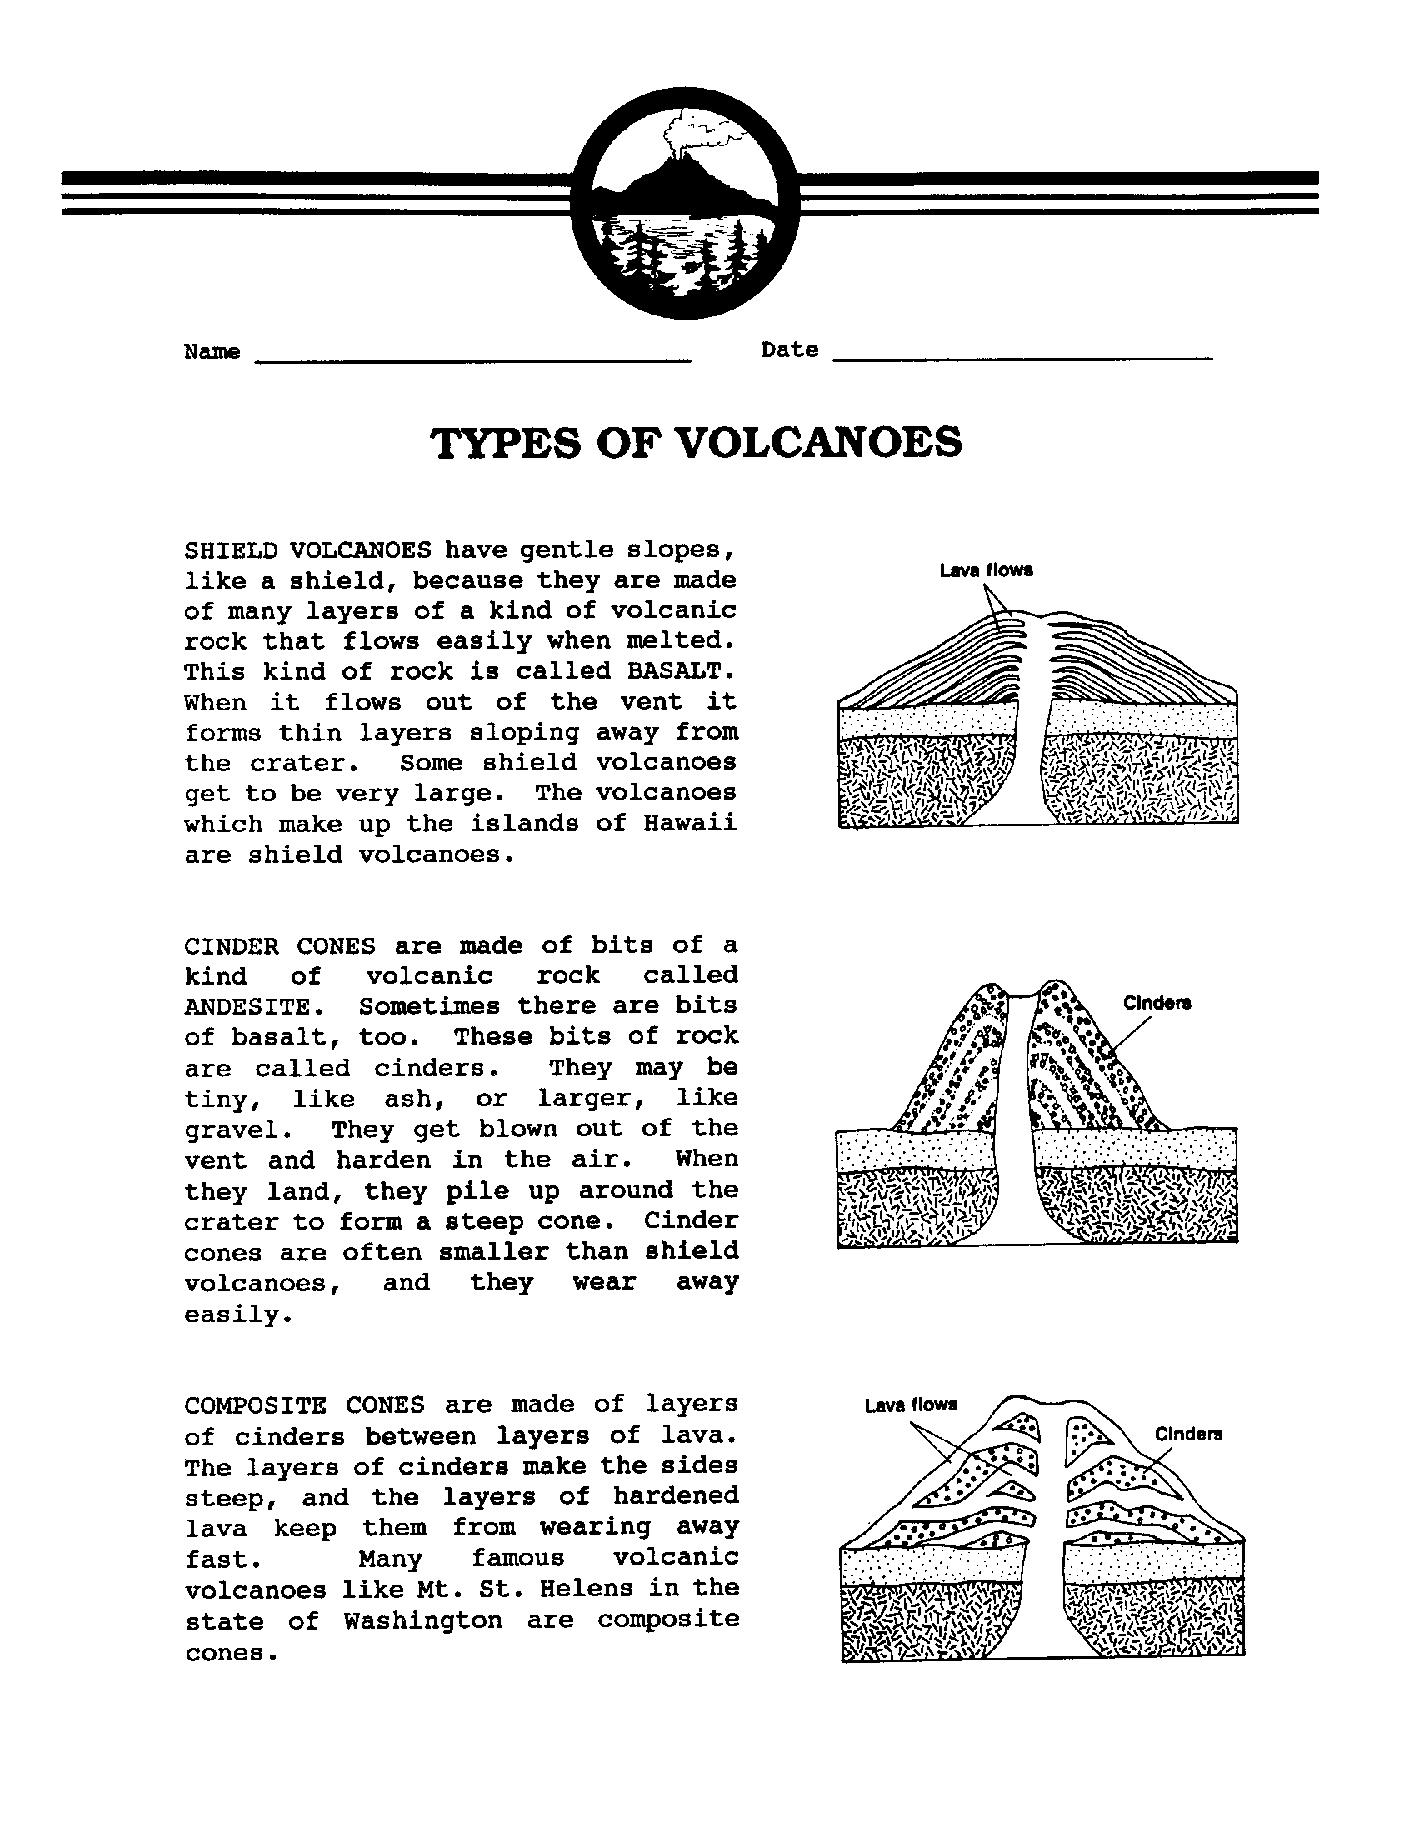 13 Best Images of Anatomy Of A Volcano Worksheet - Parts ...